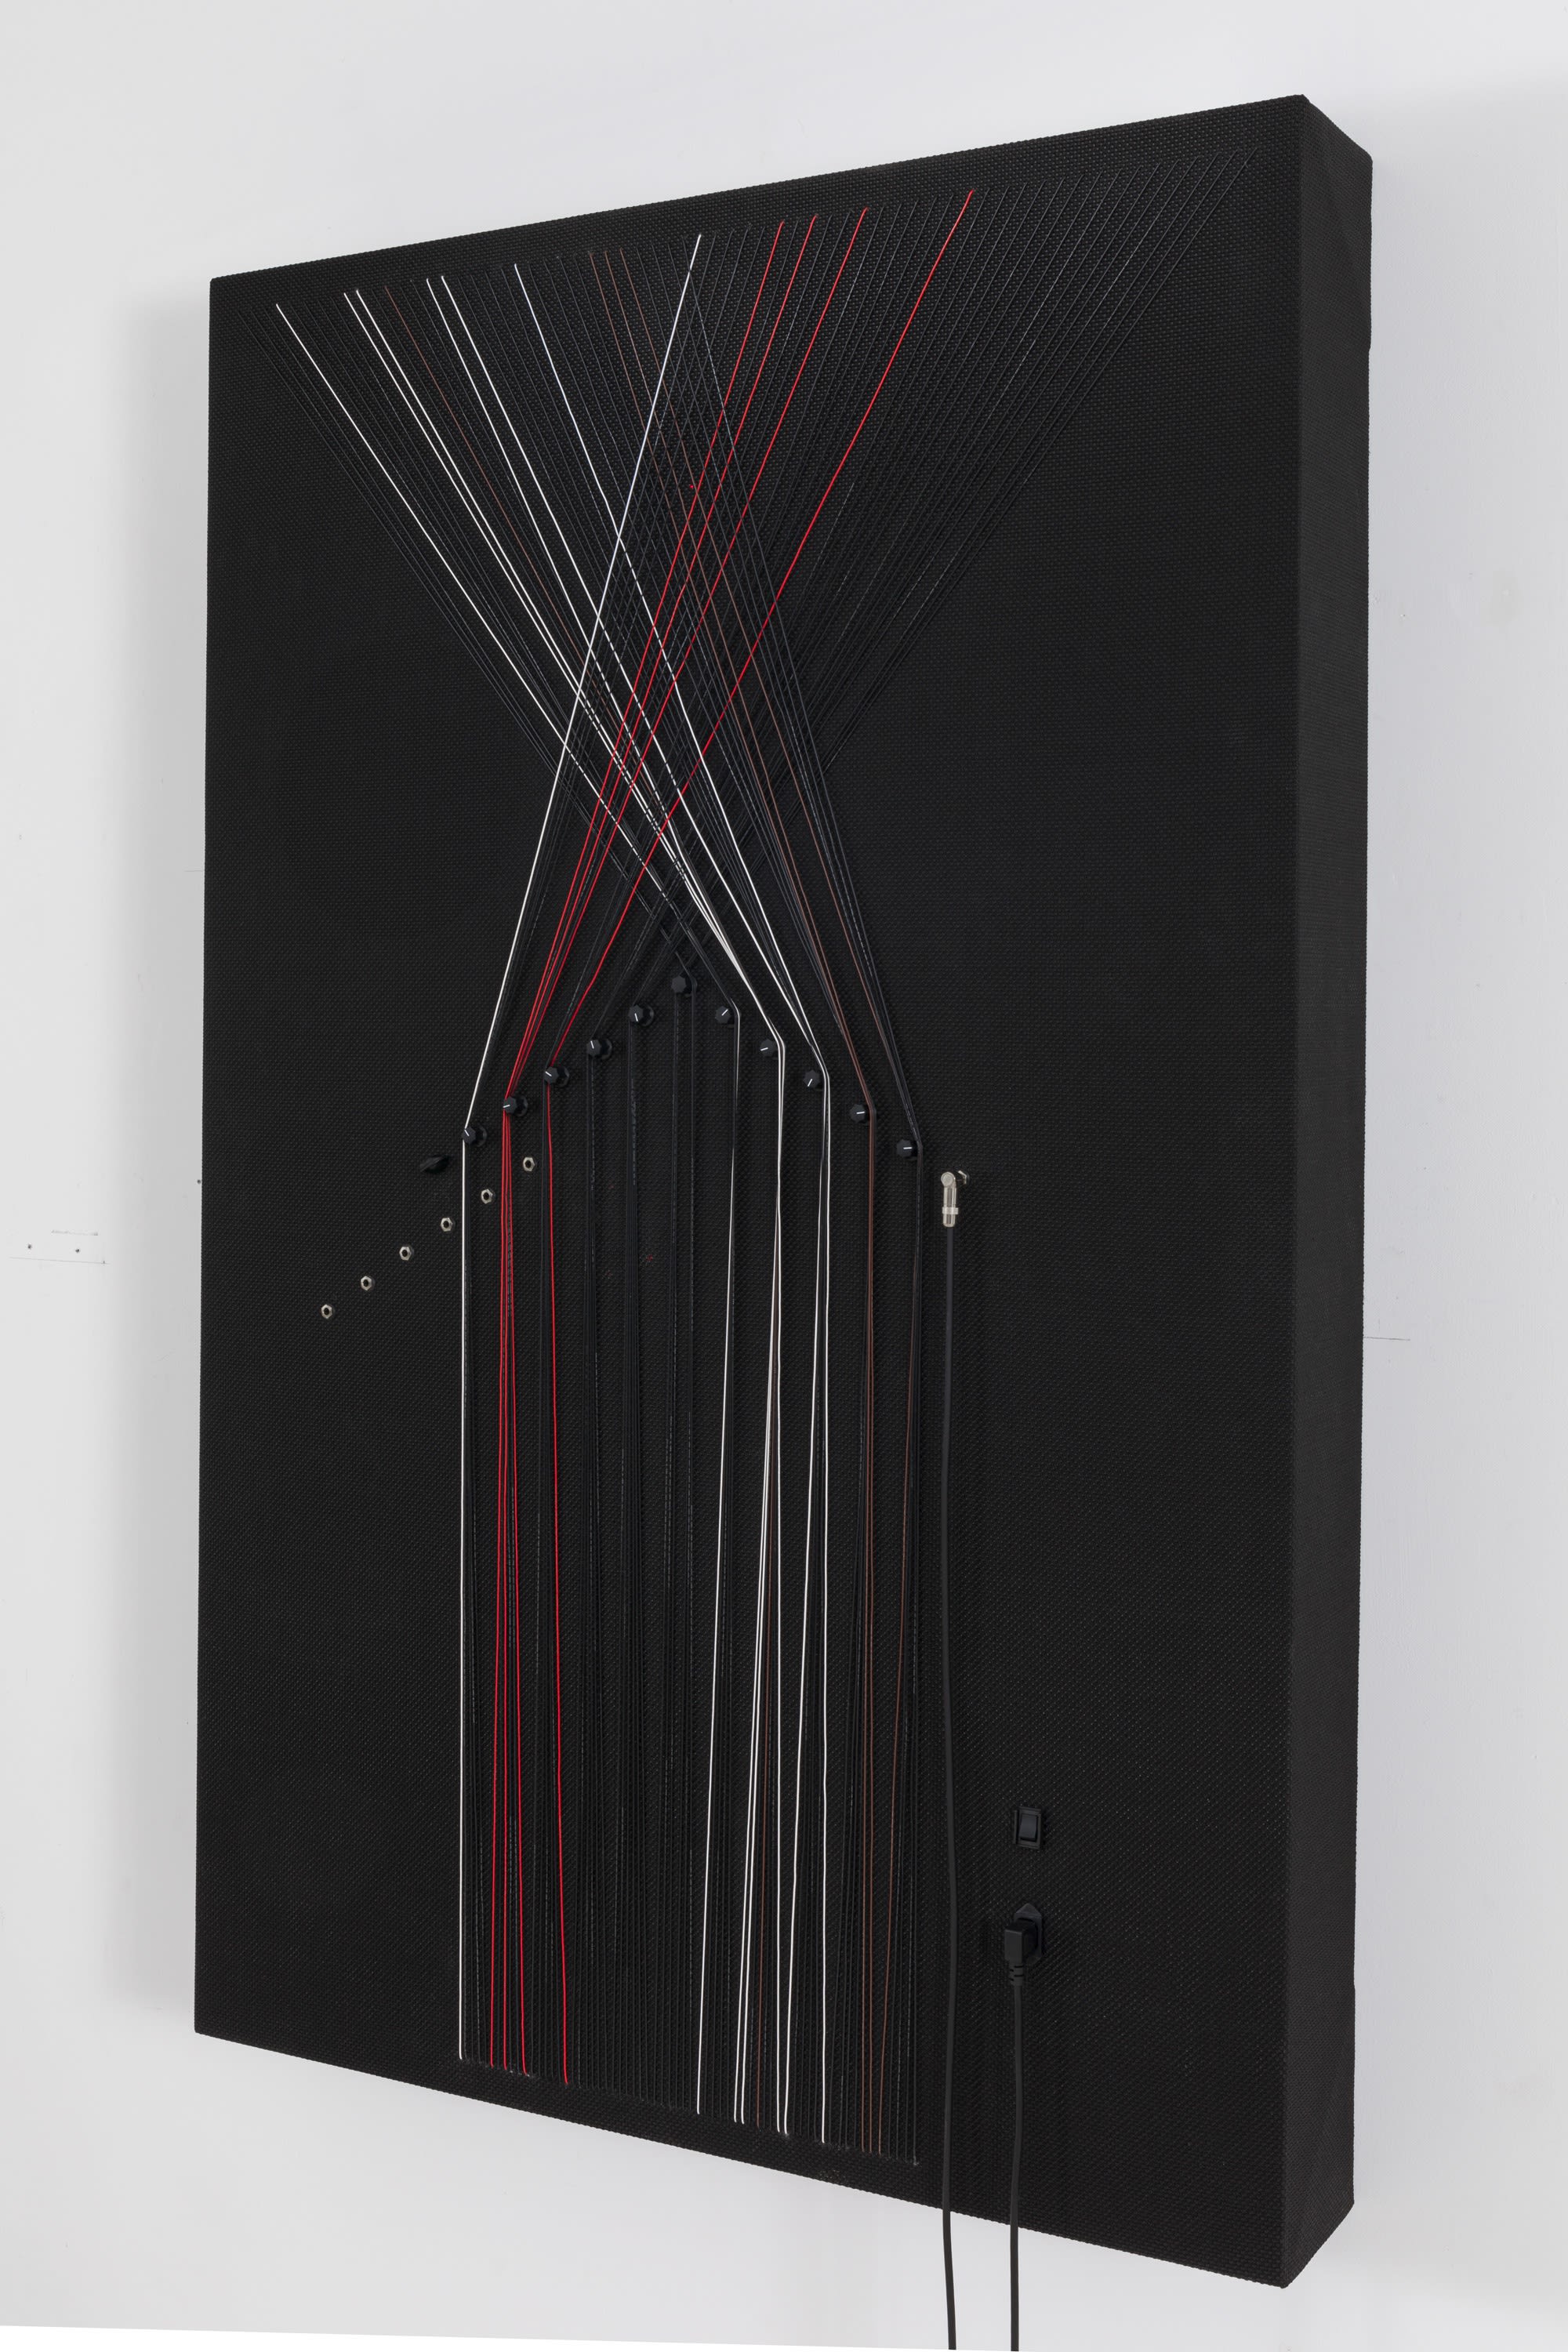 Naama Tsabar, Transition, 2019, Wood, amp grill cloth, cables, disassembled Boss Katana 100 guitar amplifier: knobs, wires, circuit board, ports, speaker, 63 x 40 5/8 x 6 1/2 inches